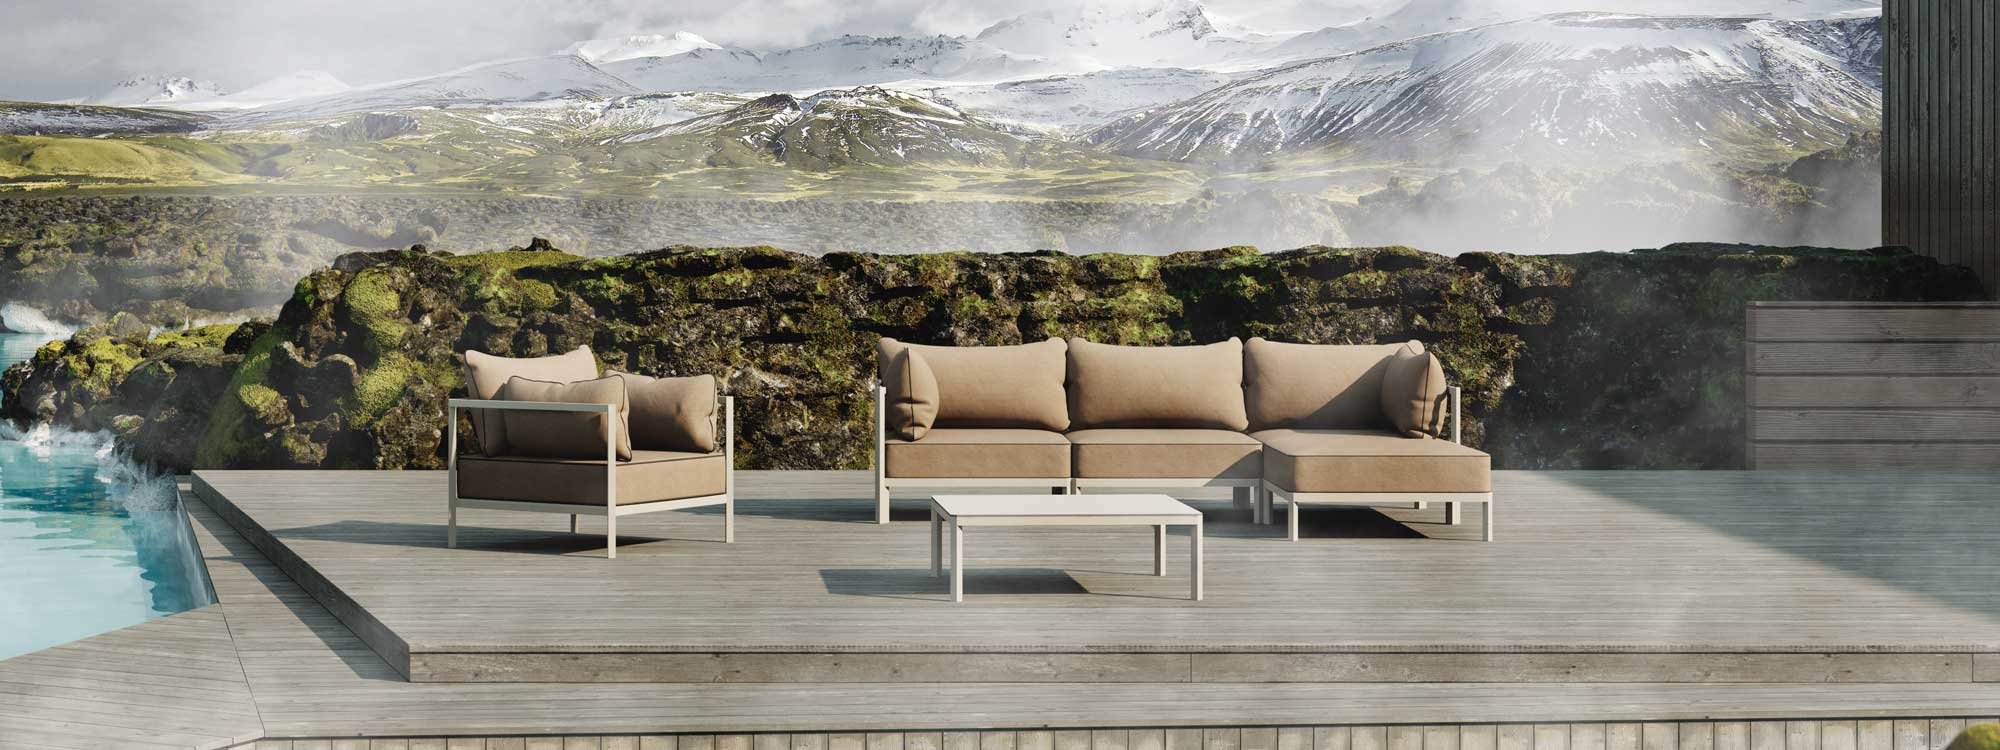 Image of Oiside 45 modular garden sofa with white frame and light brown cushions, shown on decked poolside with snowy mountains in the background